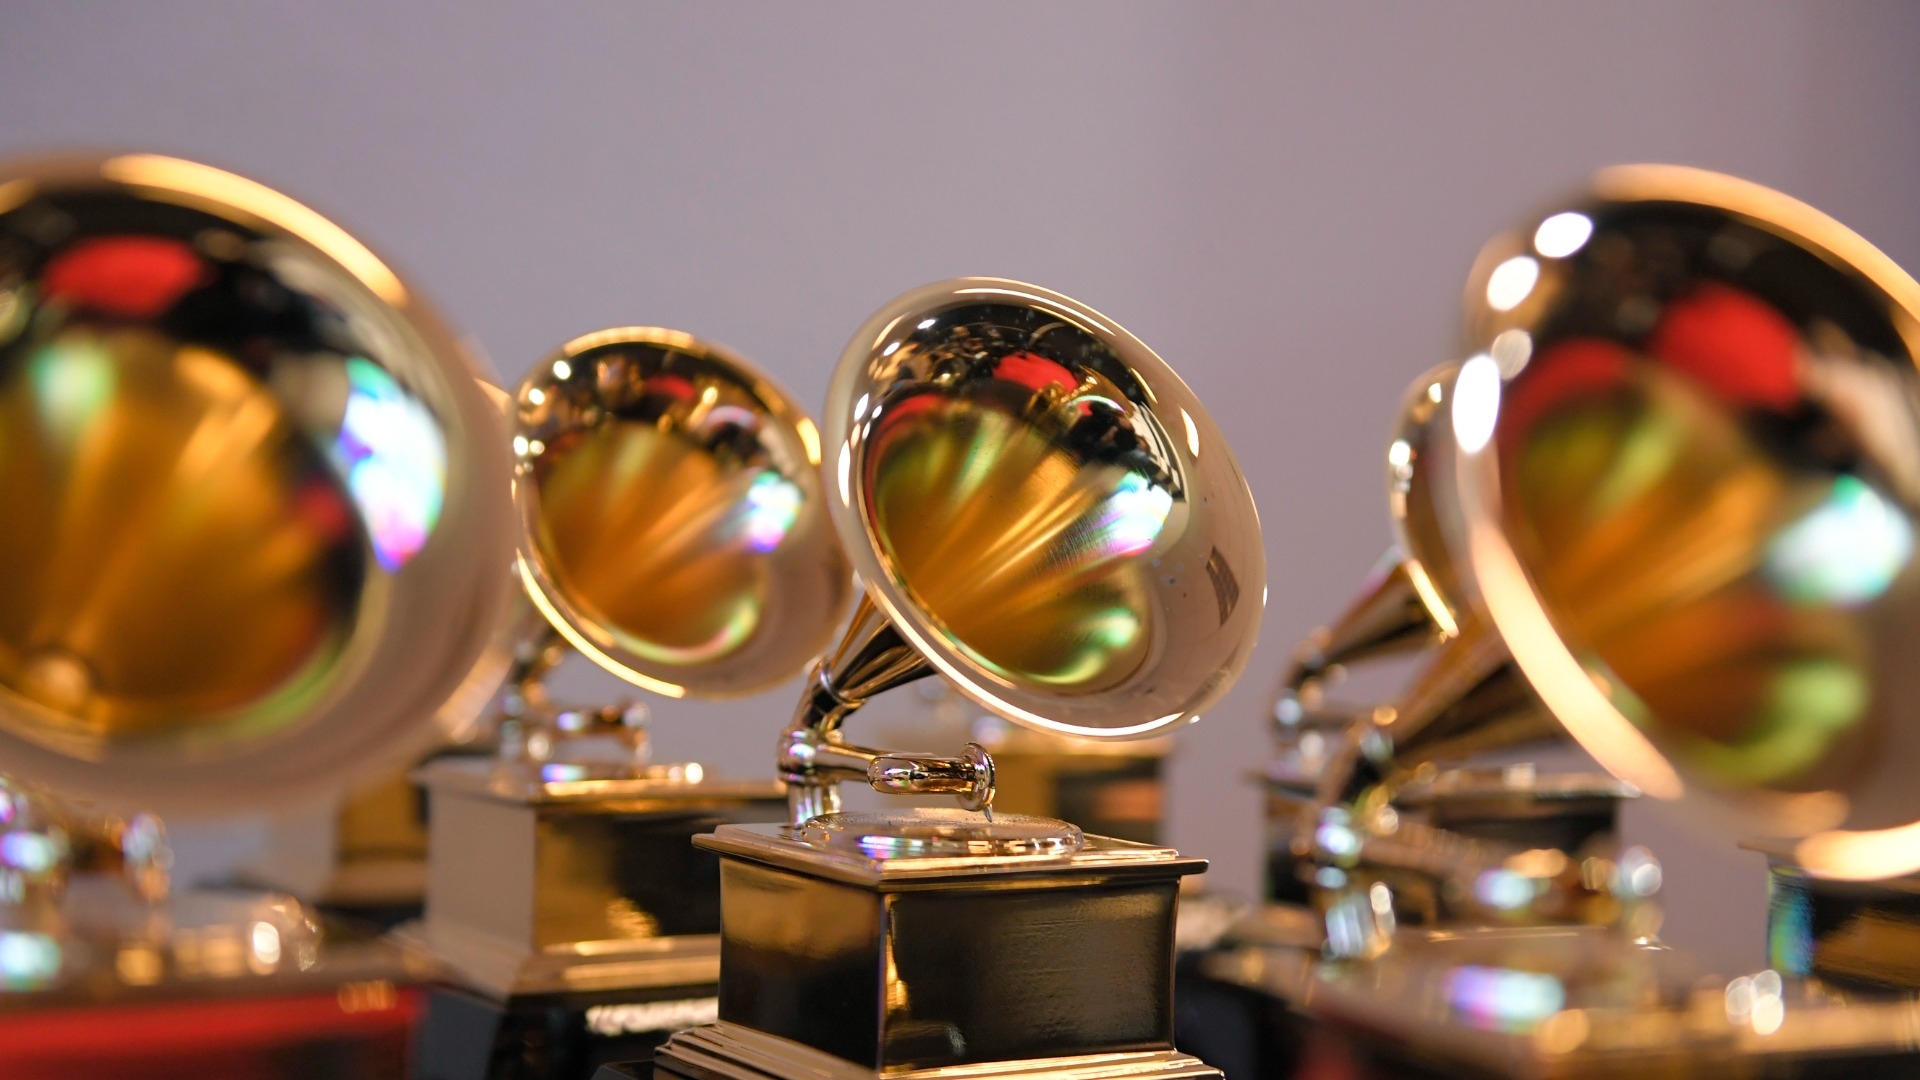 Grammy Awards announce new categories including Songwriter of the Year and Best Song for Social Change